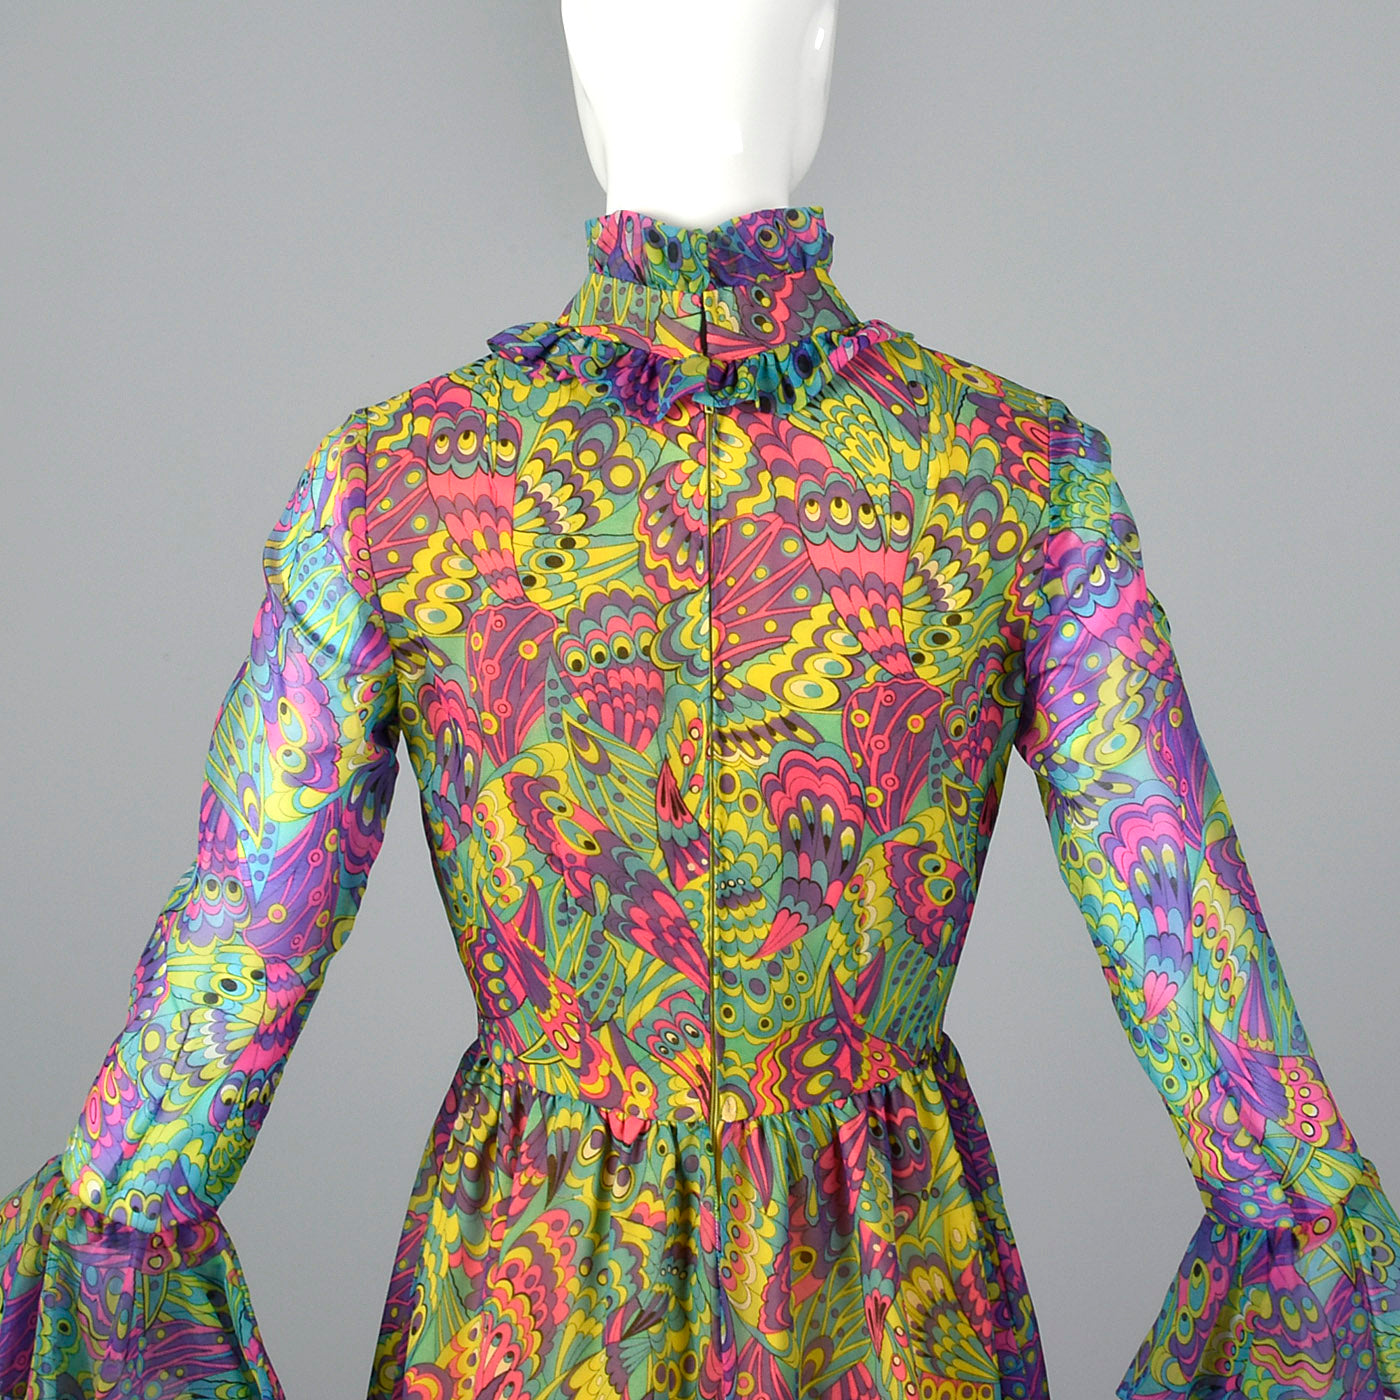 1960s Bright Psychedelic Dress